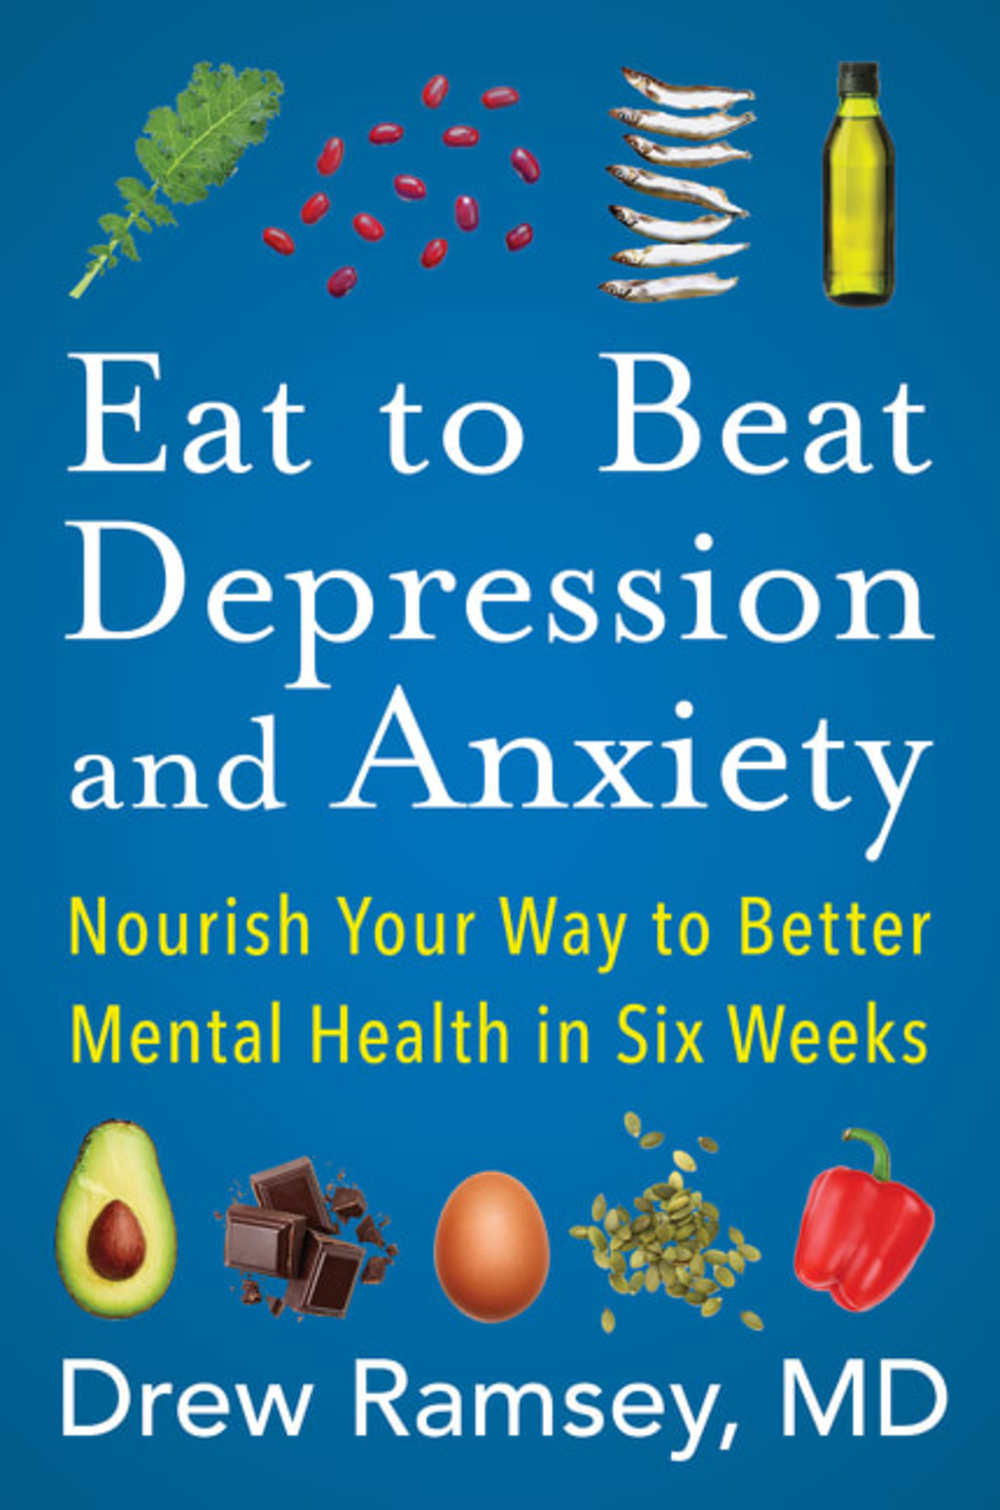 Eat to Beat Depression & Anxiety